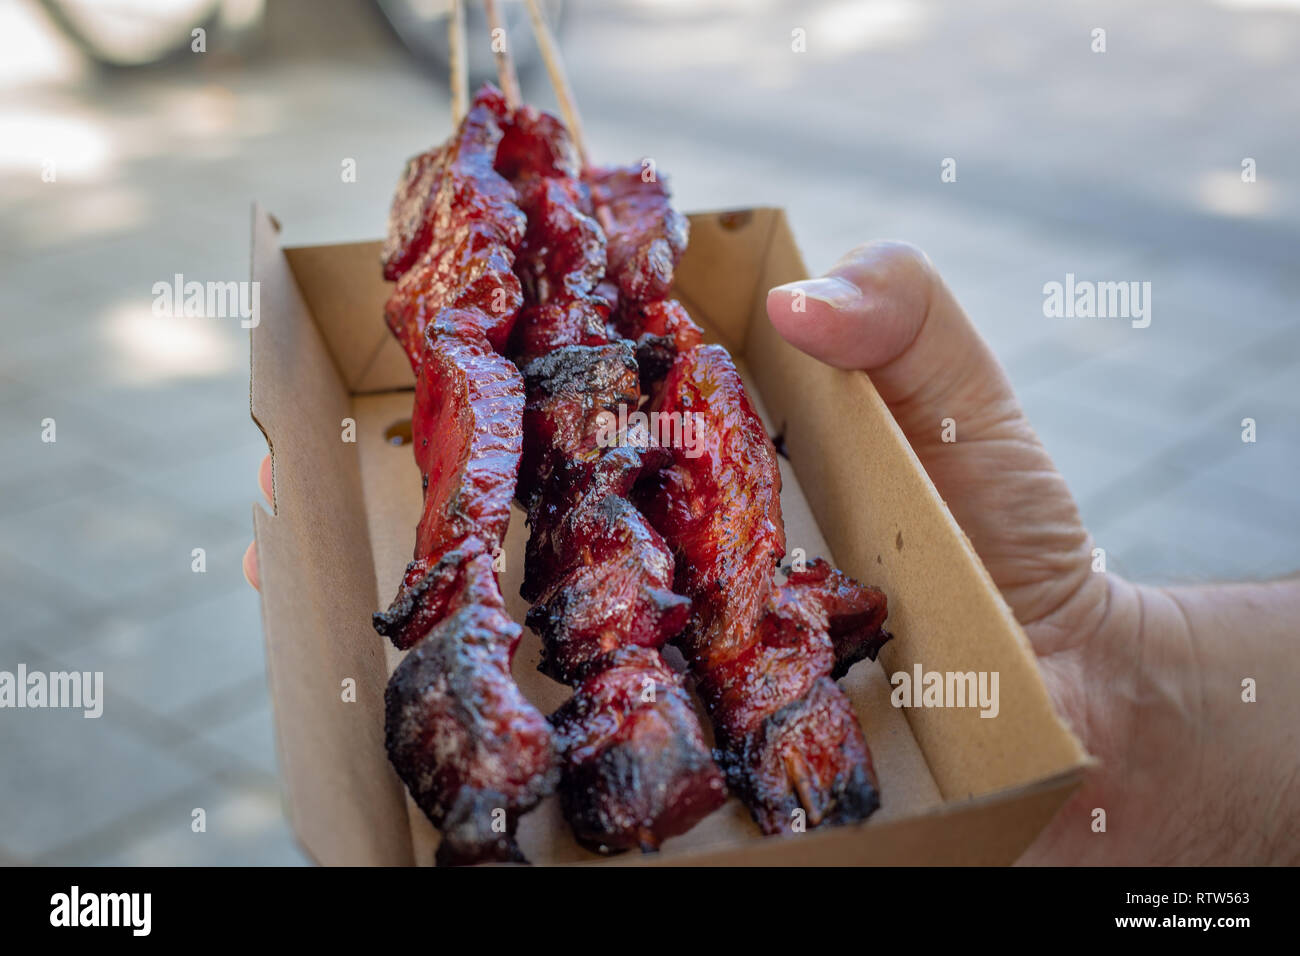 A man purchases delicious marinated barbecued kebabs in a cardboard biodegradable takeaway container at a food market in Christchurch, New Zealand Stock Photo